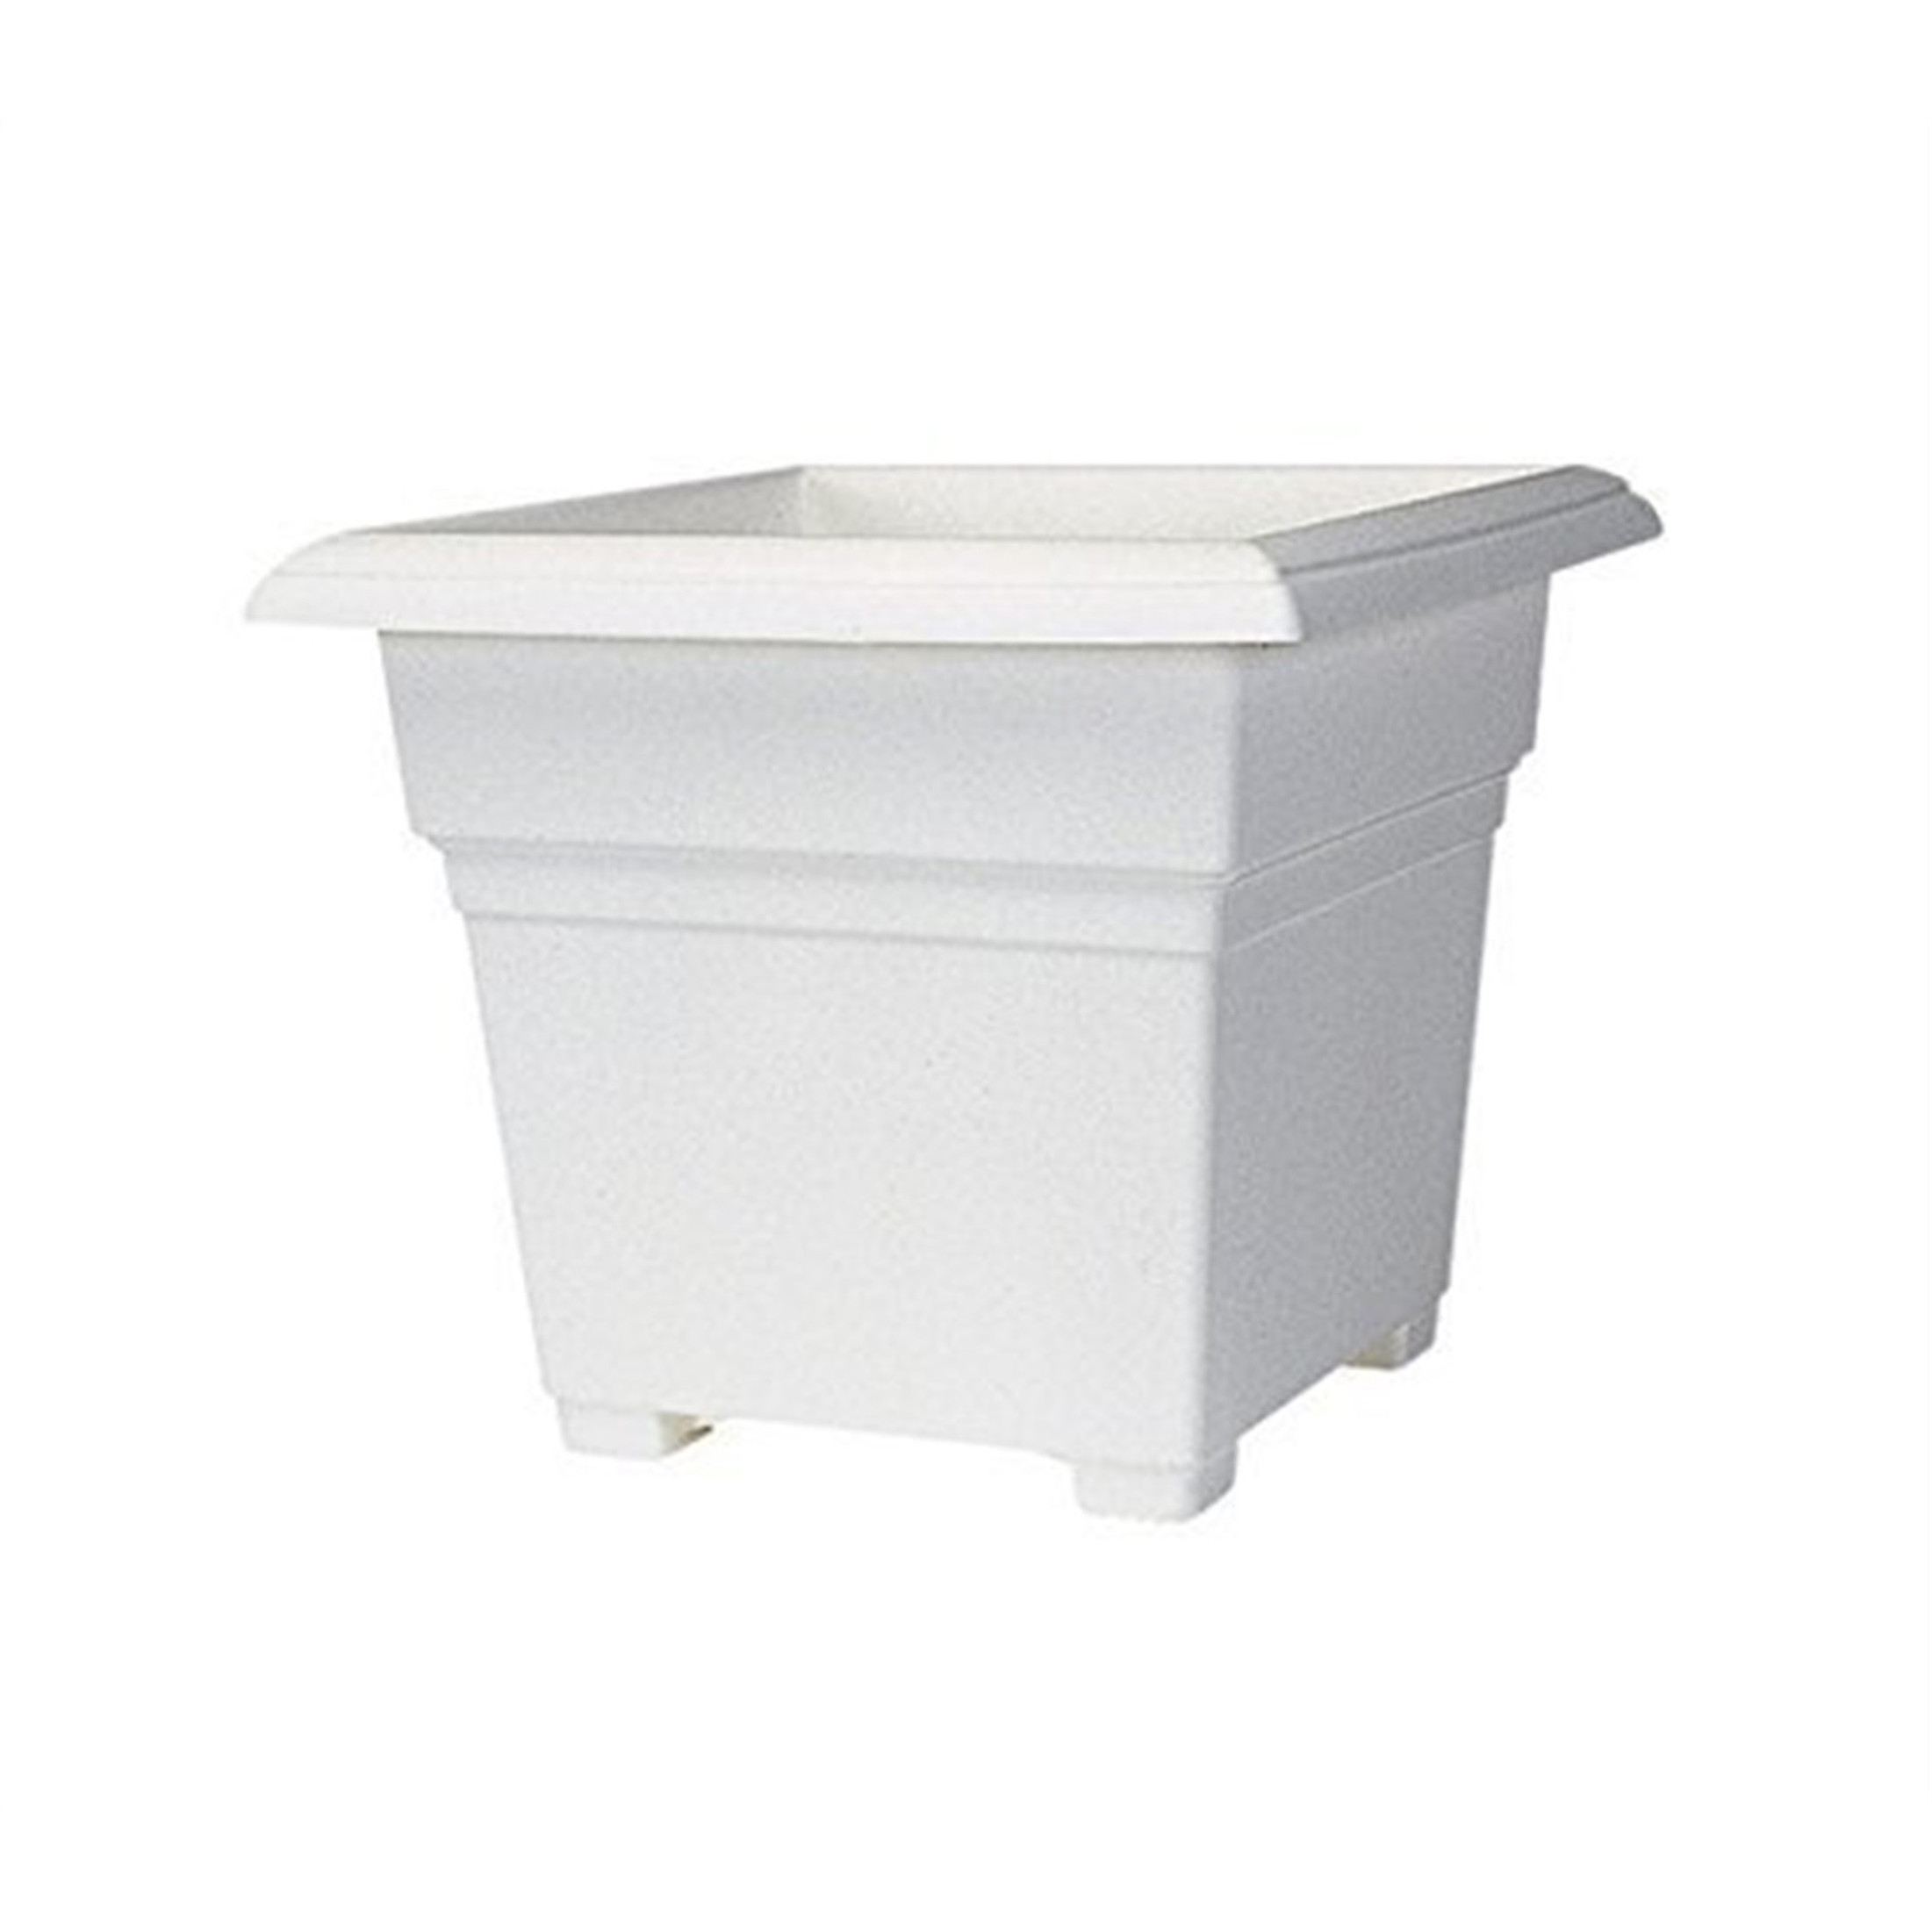 Novelty Countryside Square Tub Planter, White, 14 Inch